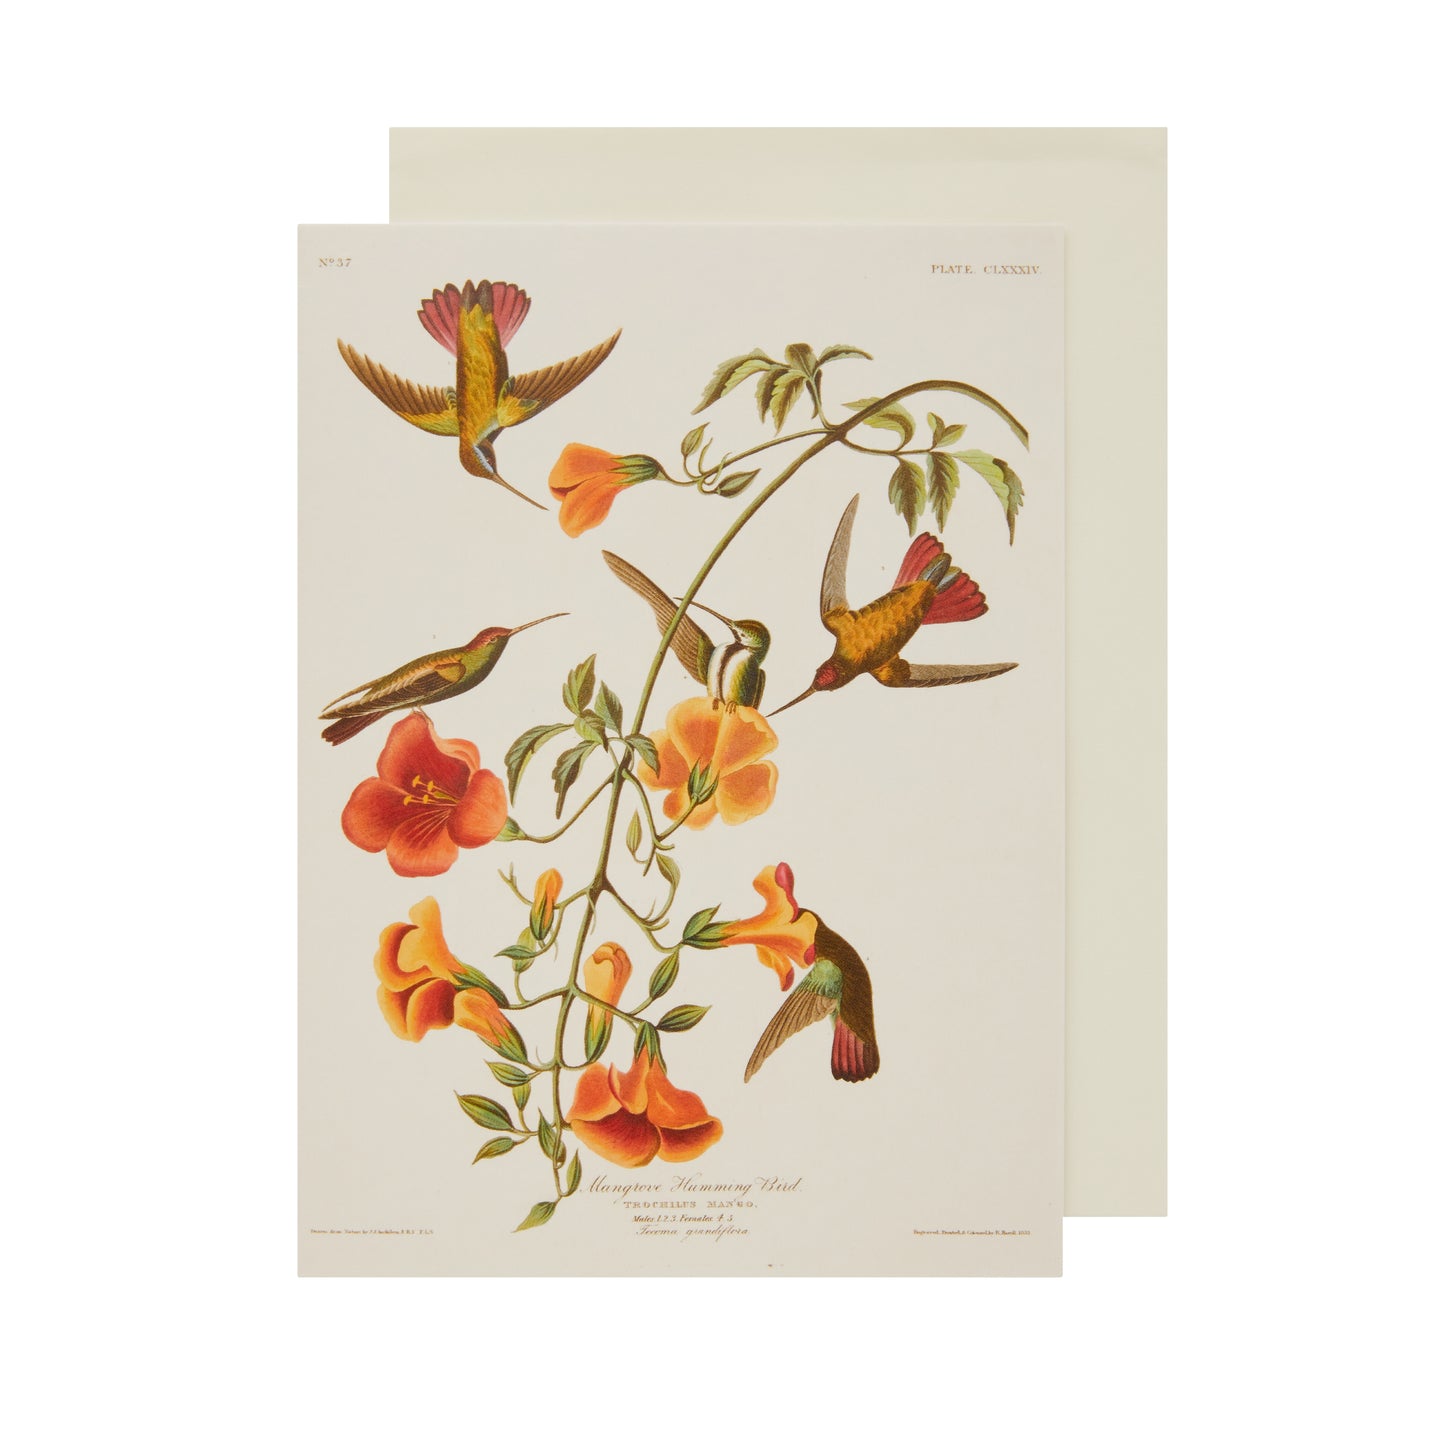 Greeting card, portrait format - hummingbirds by John James Audubon. Five hummingbirds around a sprig with orange flowers. From the collection of The Fitzwilliam Museum, brought to you by CuratingCambridge.co.uk